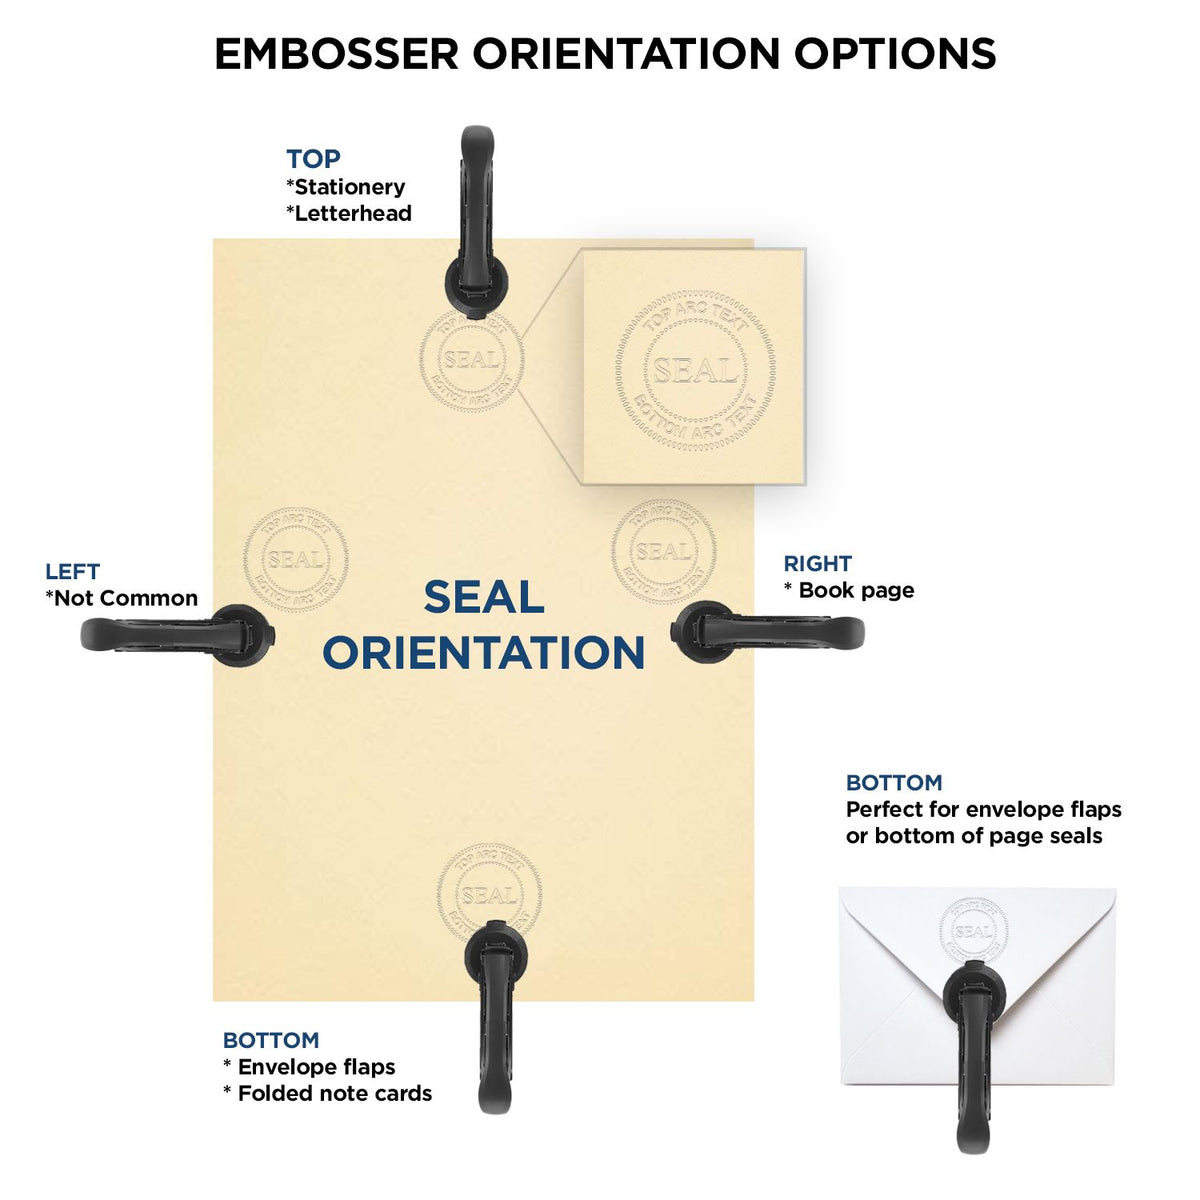 An infographic for the Handheld Alabama Professional Engineer Embosser showing embosser orientation, this is showing examples of a top, bottom, right and left insert.